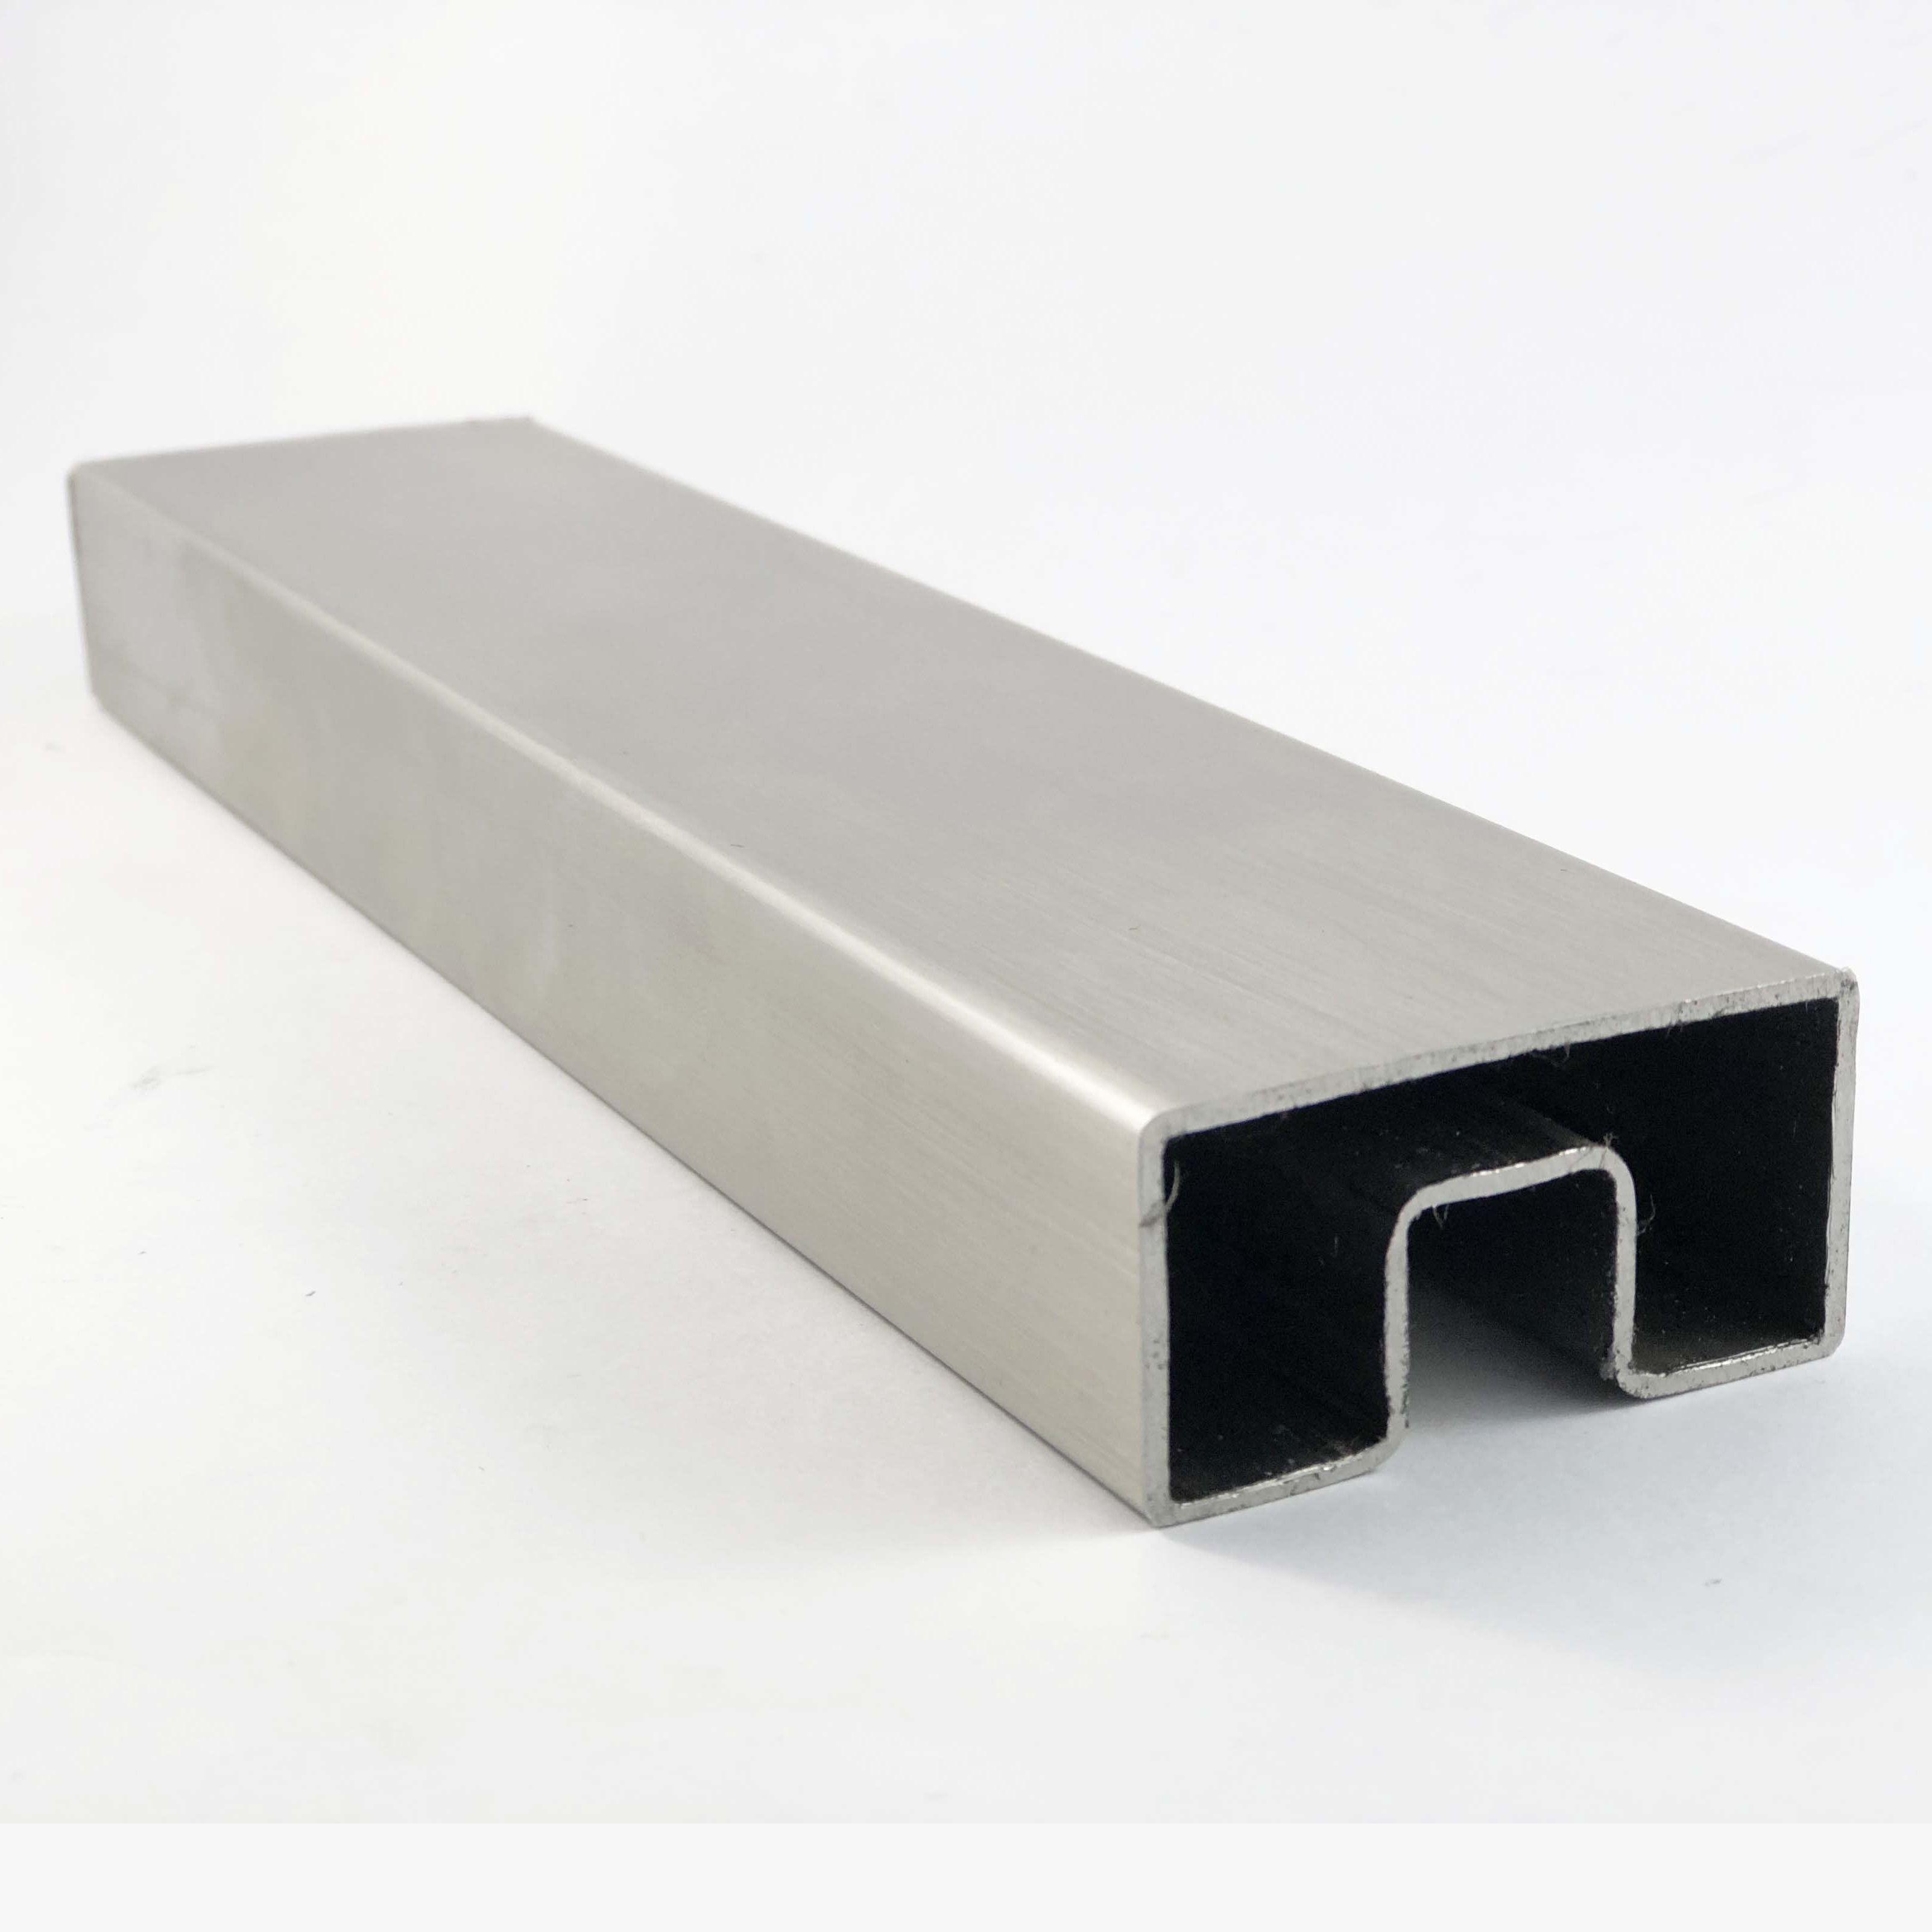 Tube Slotted 25mm x 50mm Stainless Steel 2900mm - Polished